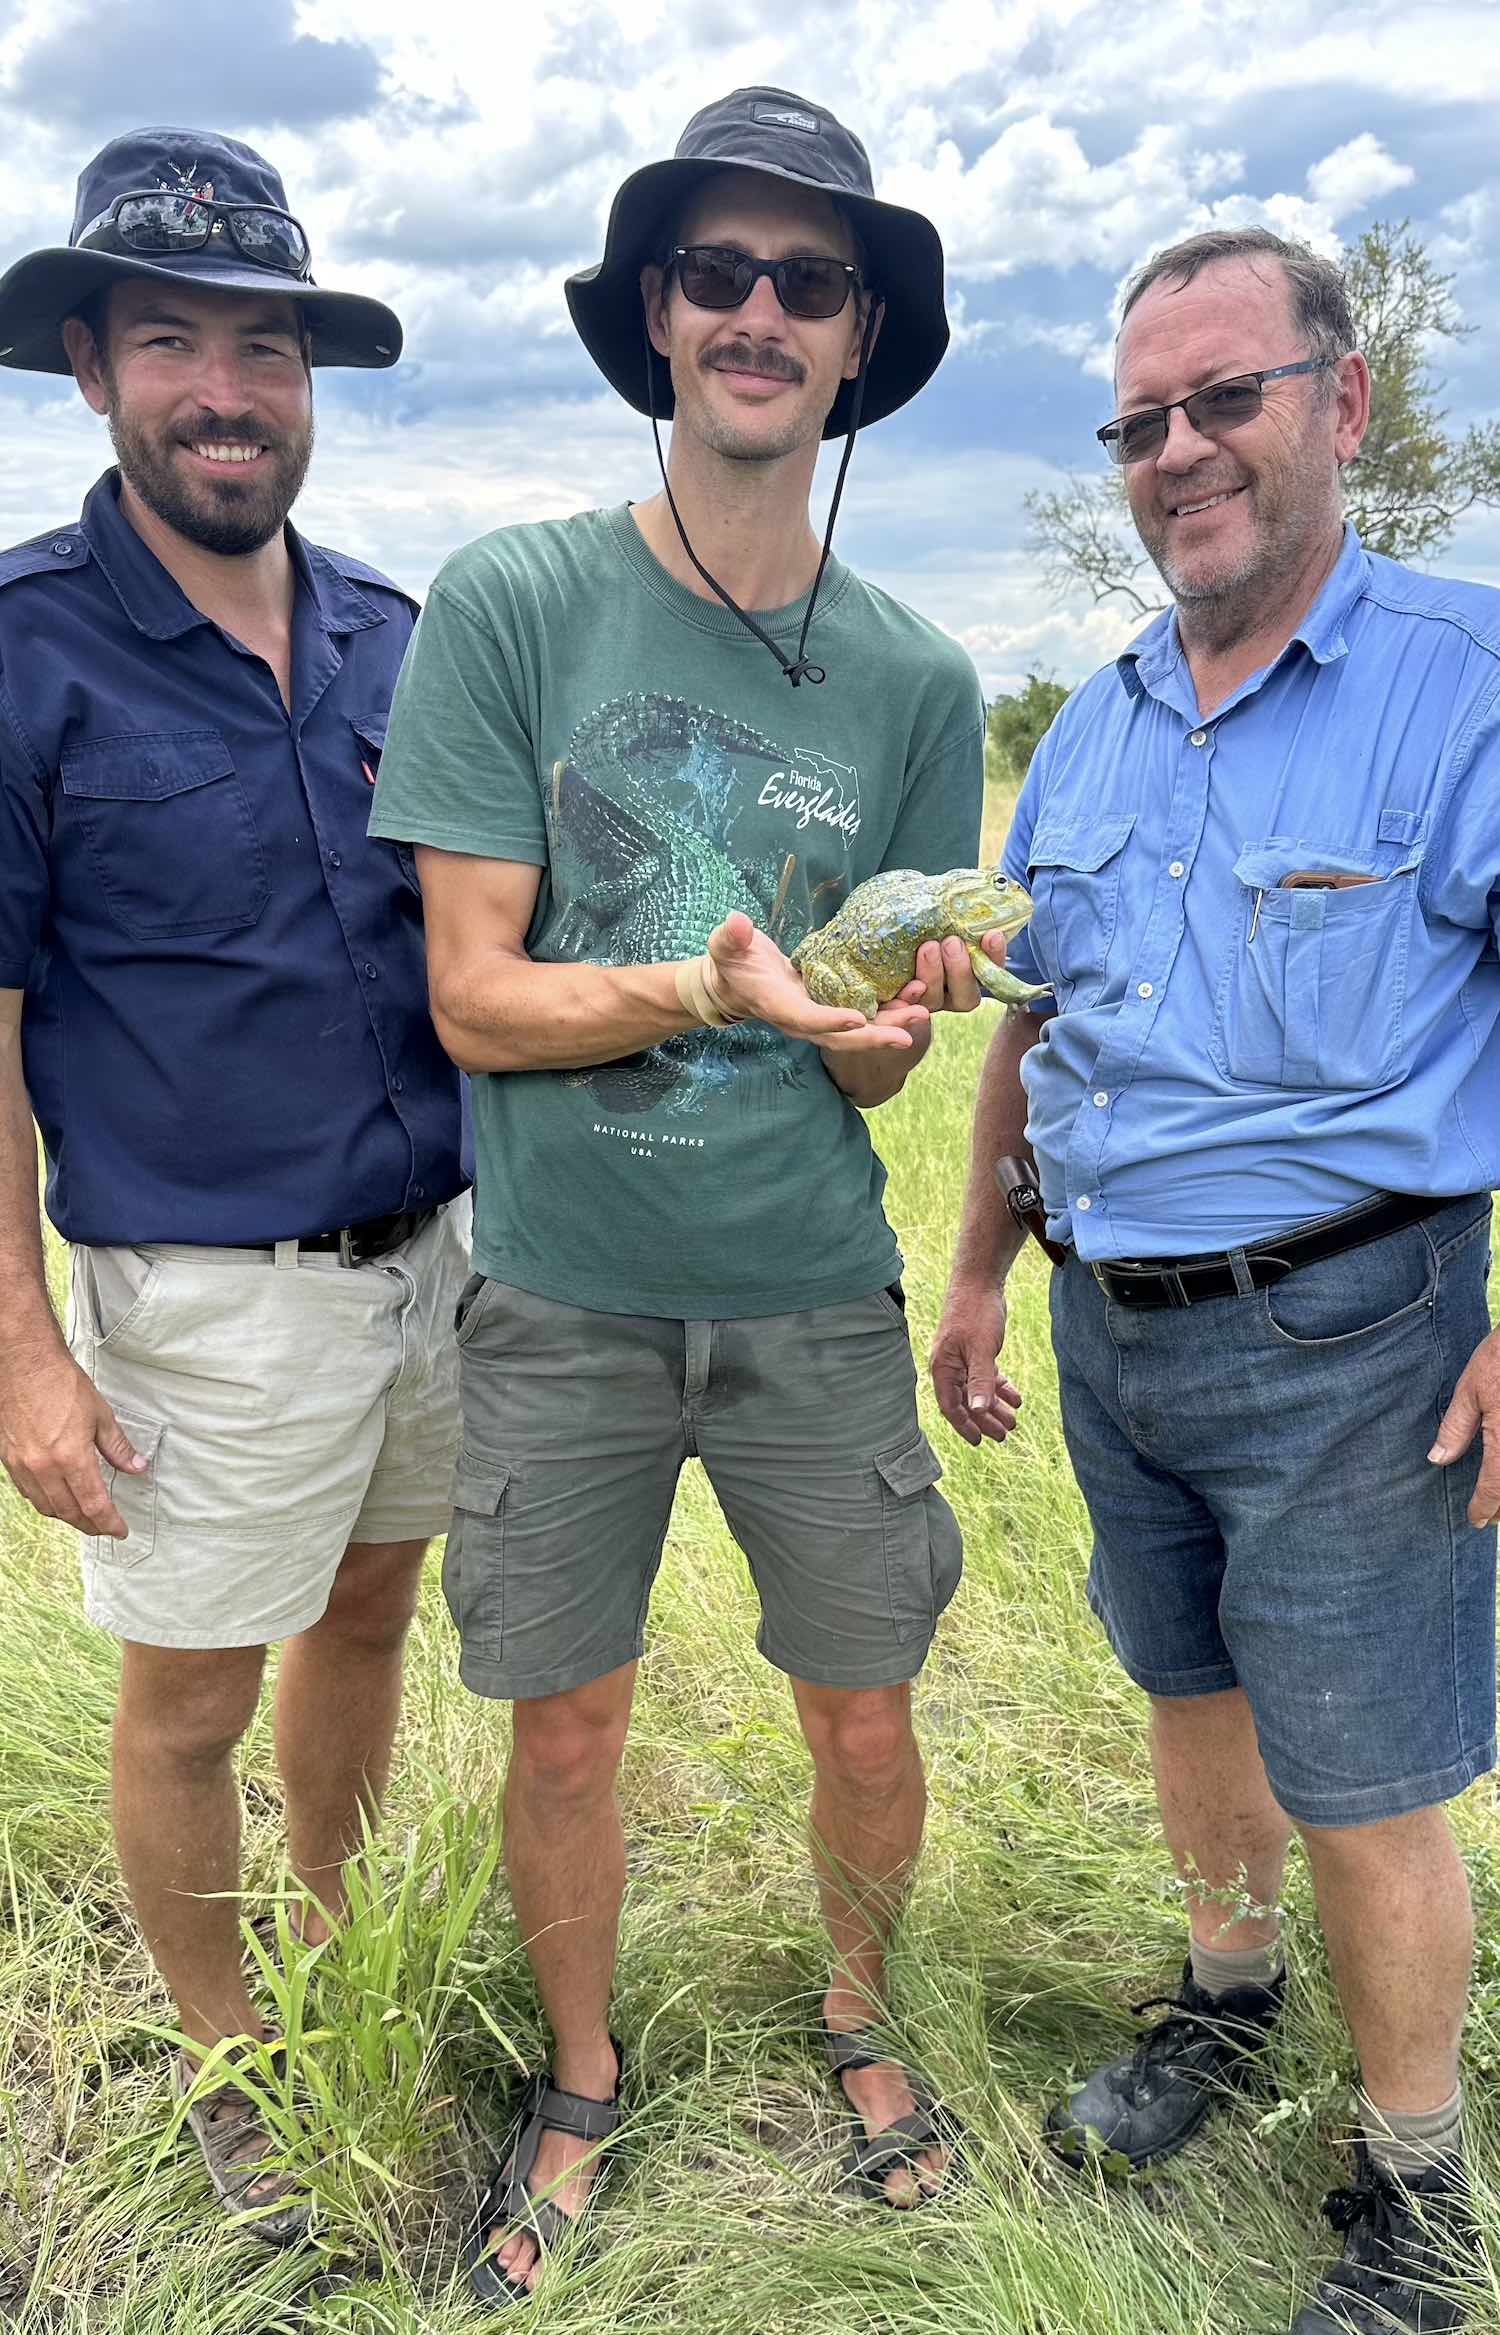 Three men smiling at the camera, while the middle one holds a bullfrog.